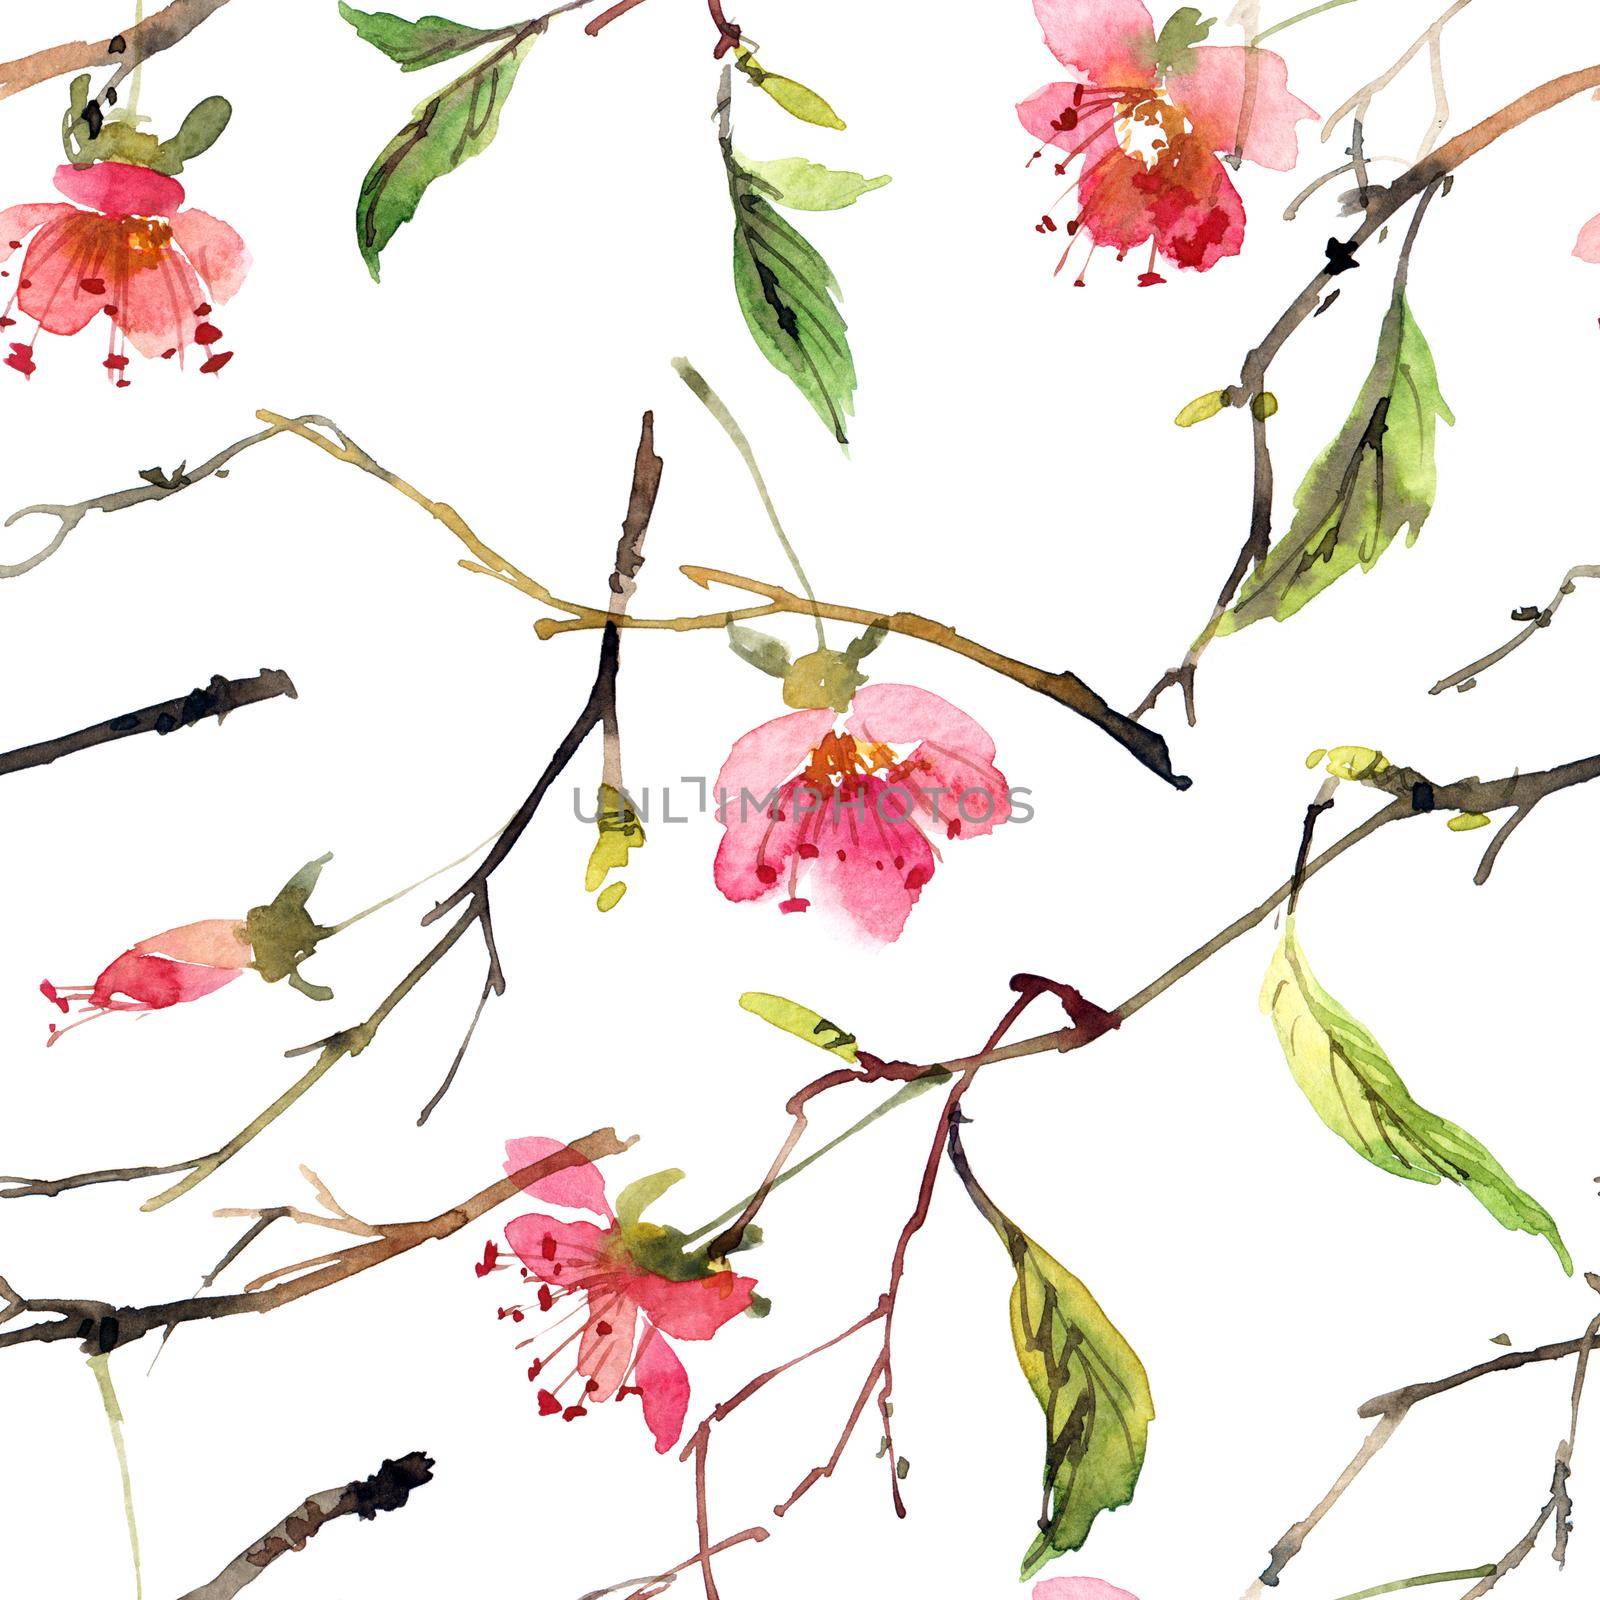 Watercolor seamless pattern with pink flowers and green leaves of blossom tree